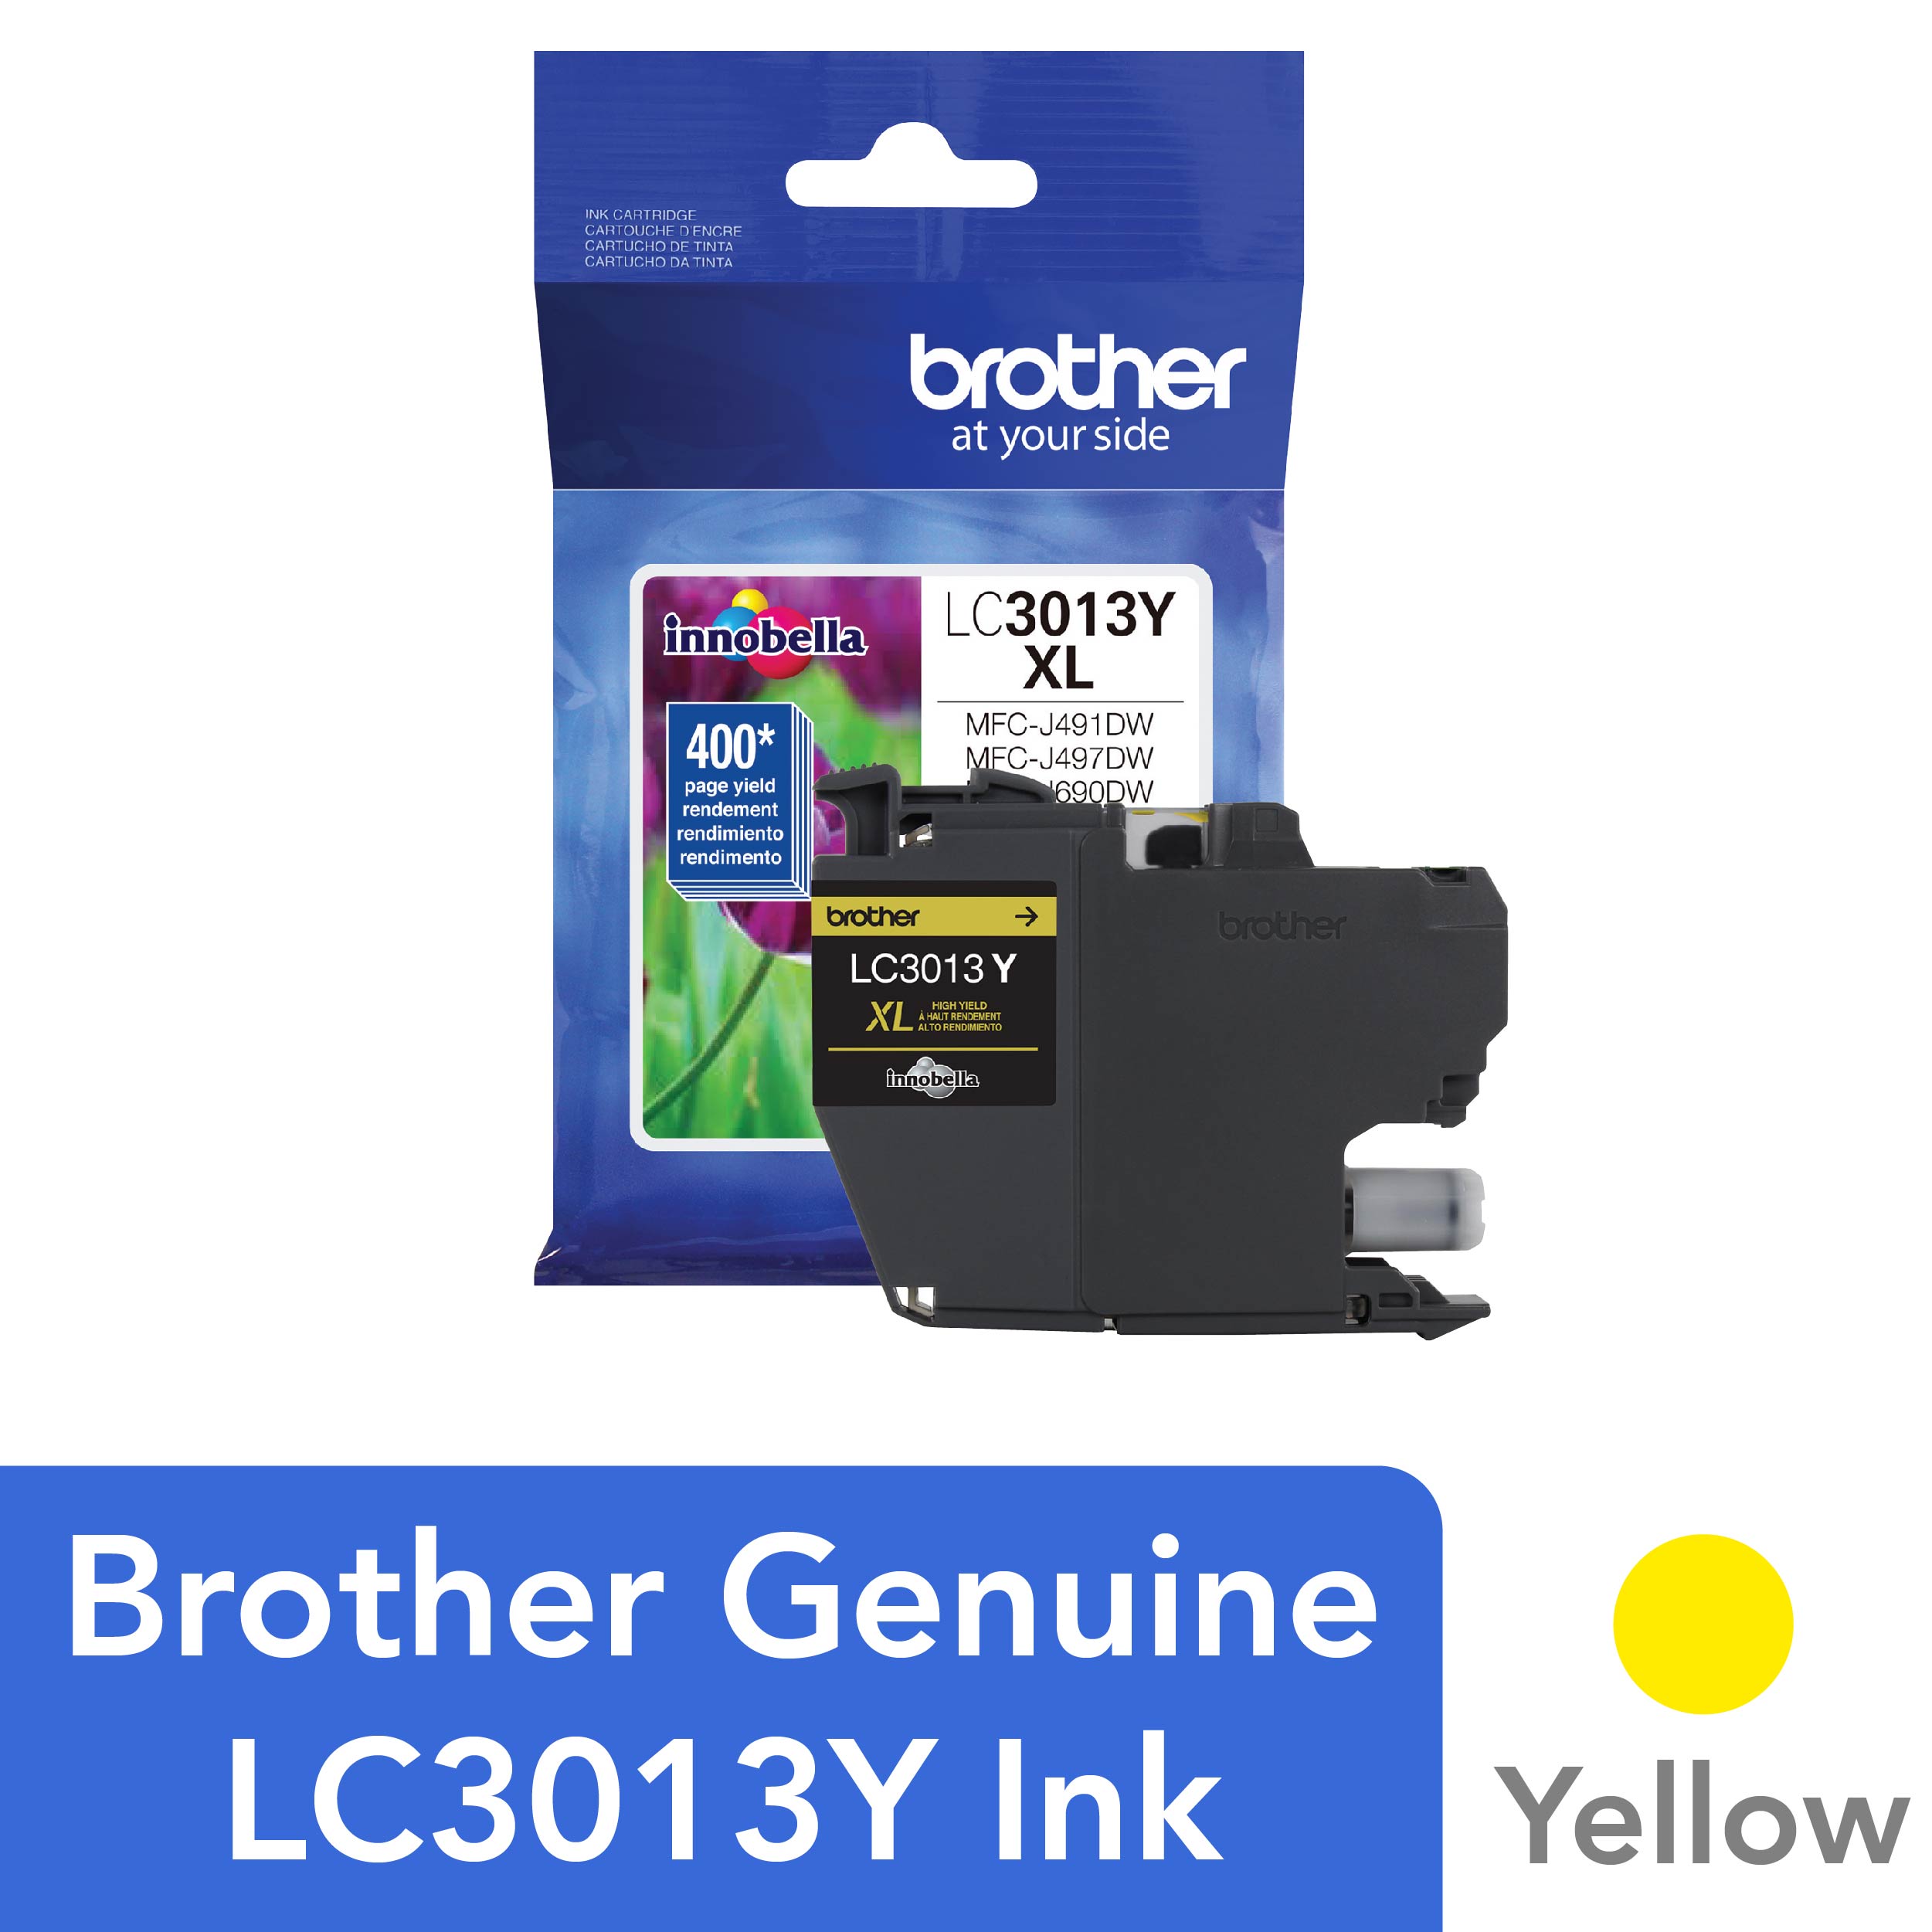 Brother Genuine LC3013Y High-Yield Yellow Printer Ink Cartridge - image 1 of 6